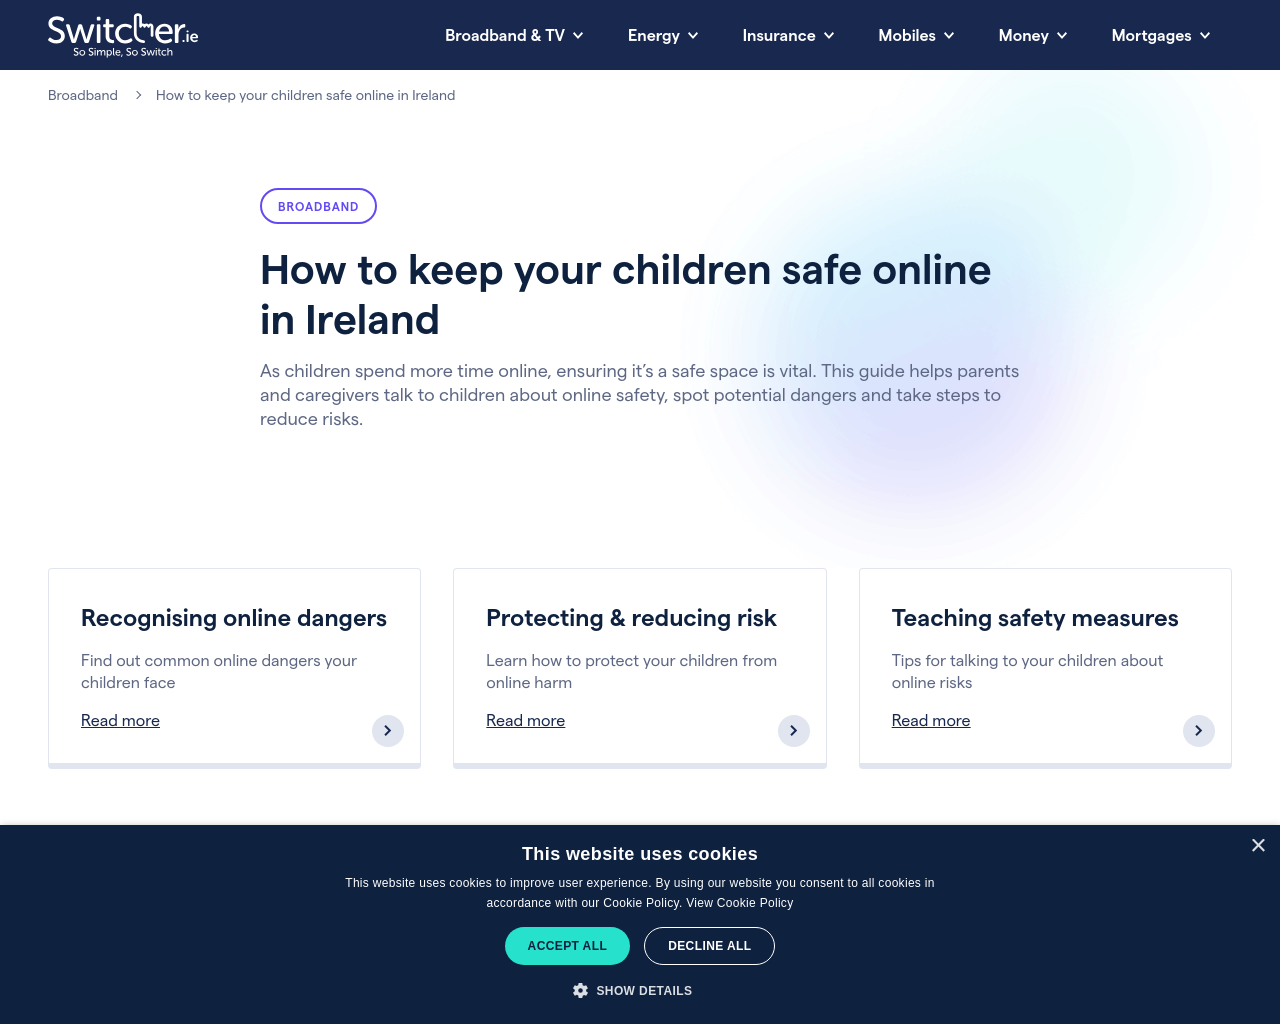 How to keep your children safe online